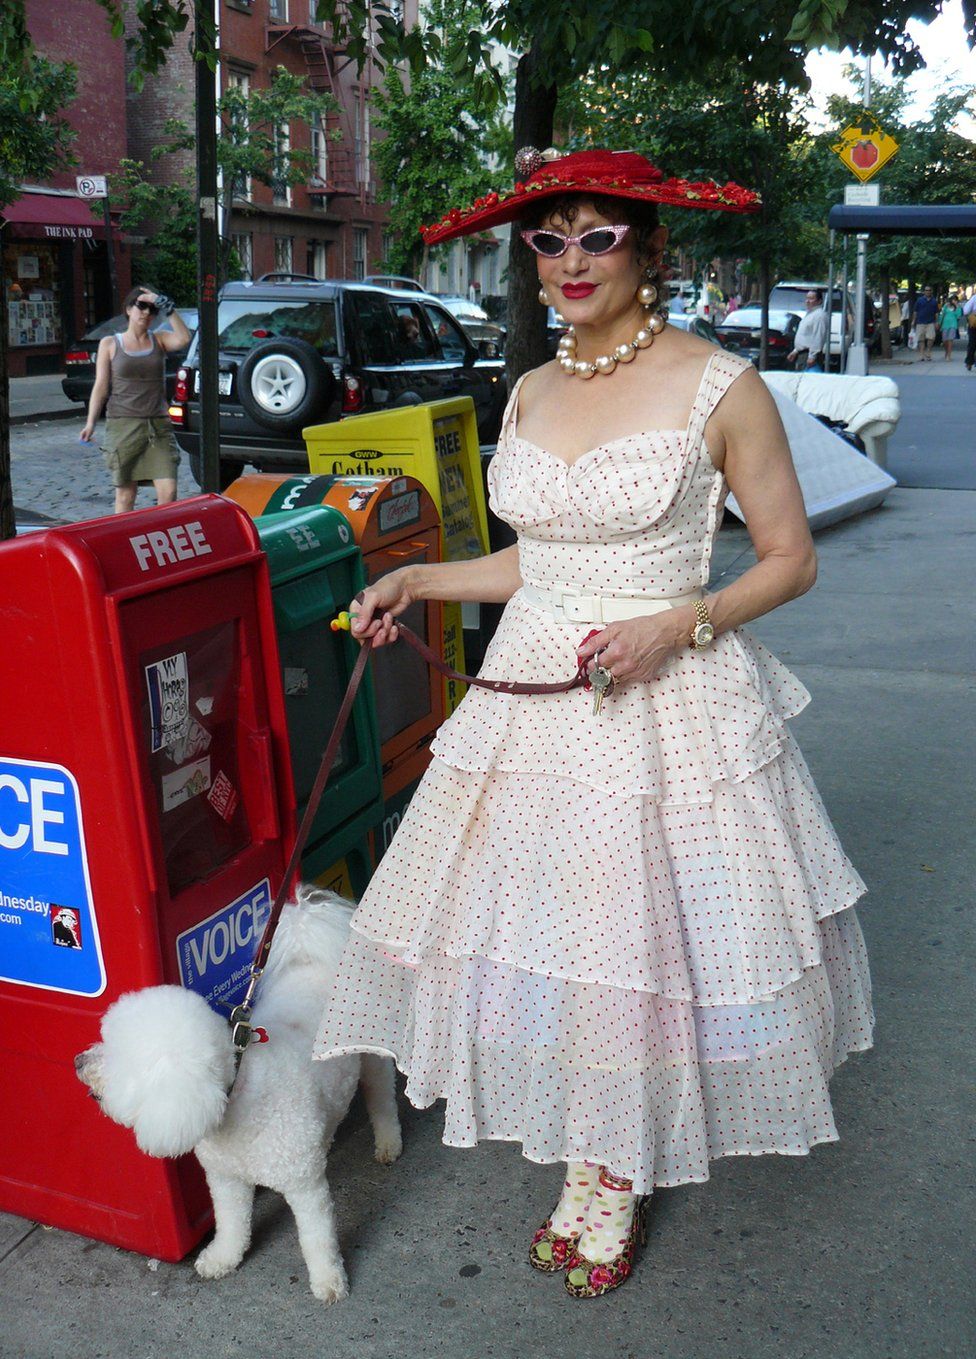 A woman dressed in an 1950s-style polka dot dress walks her dog